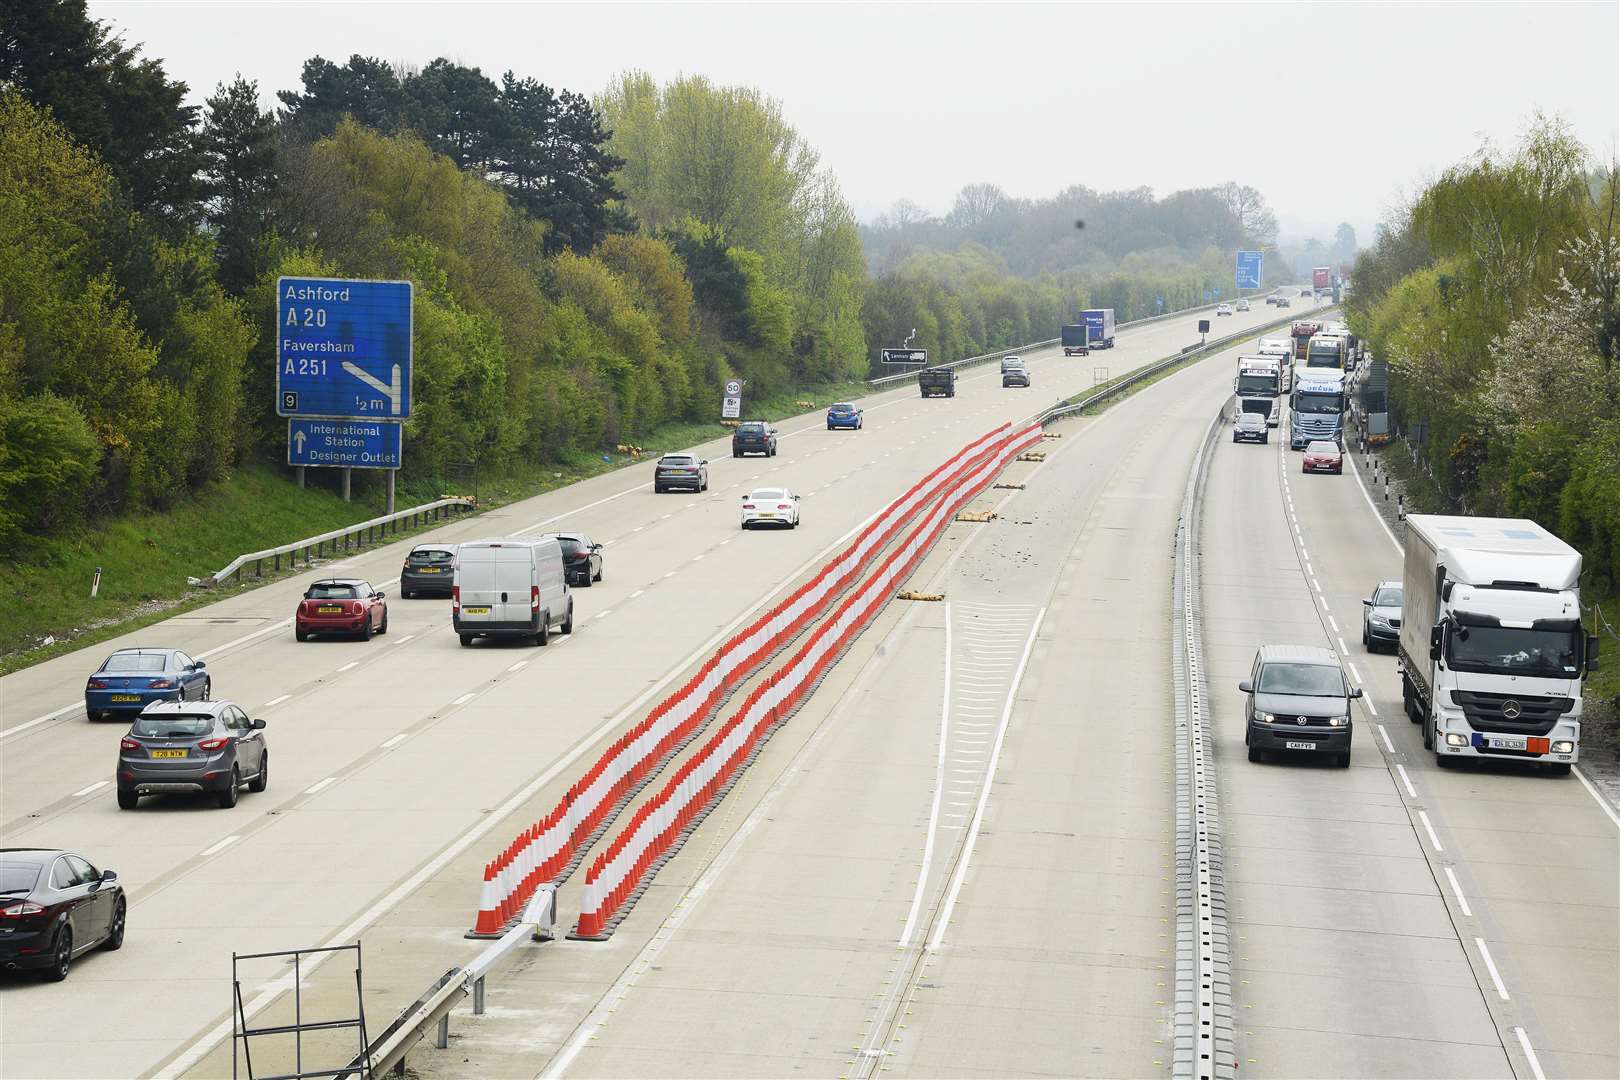 M20 will be closed all weekend